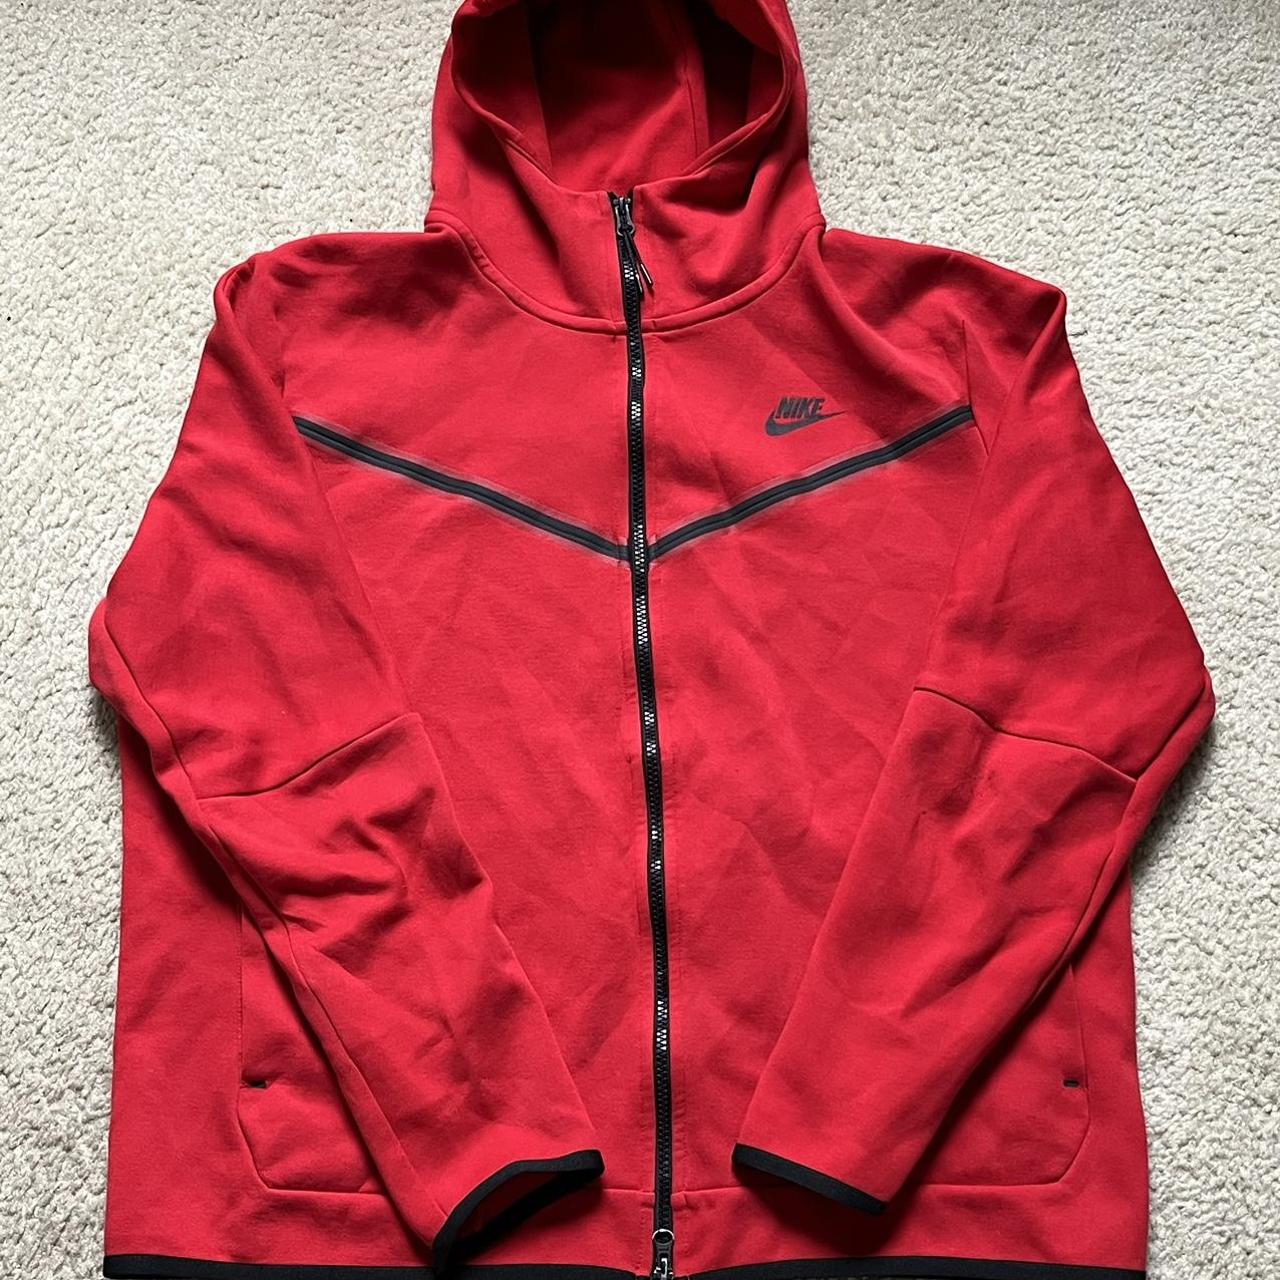 Red Nike Tech (super comfortable and good for the cold) - Depop